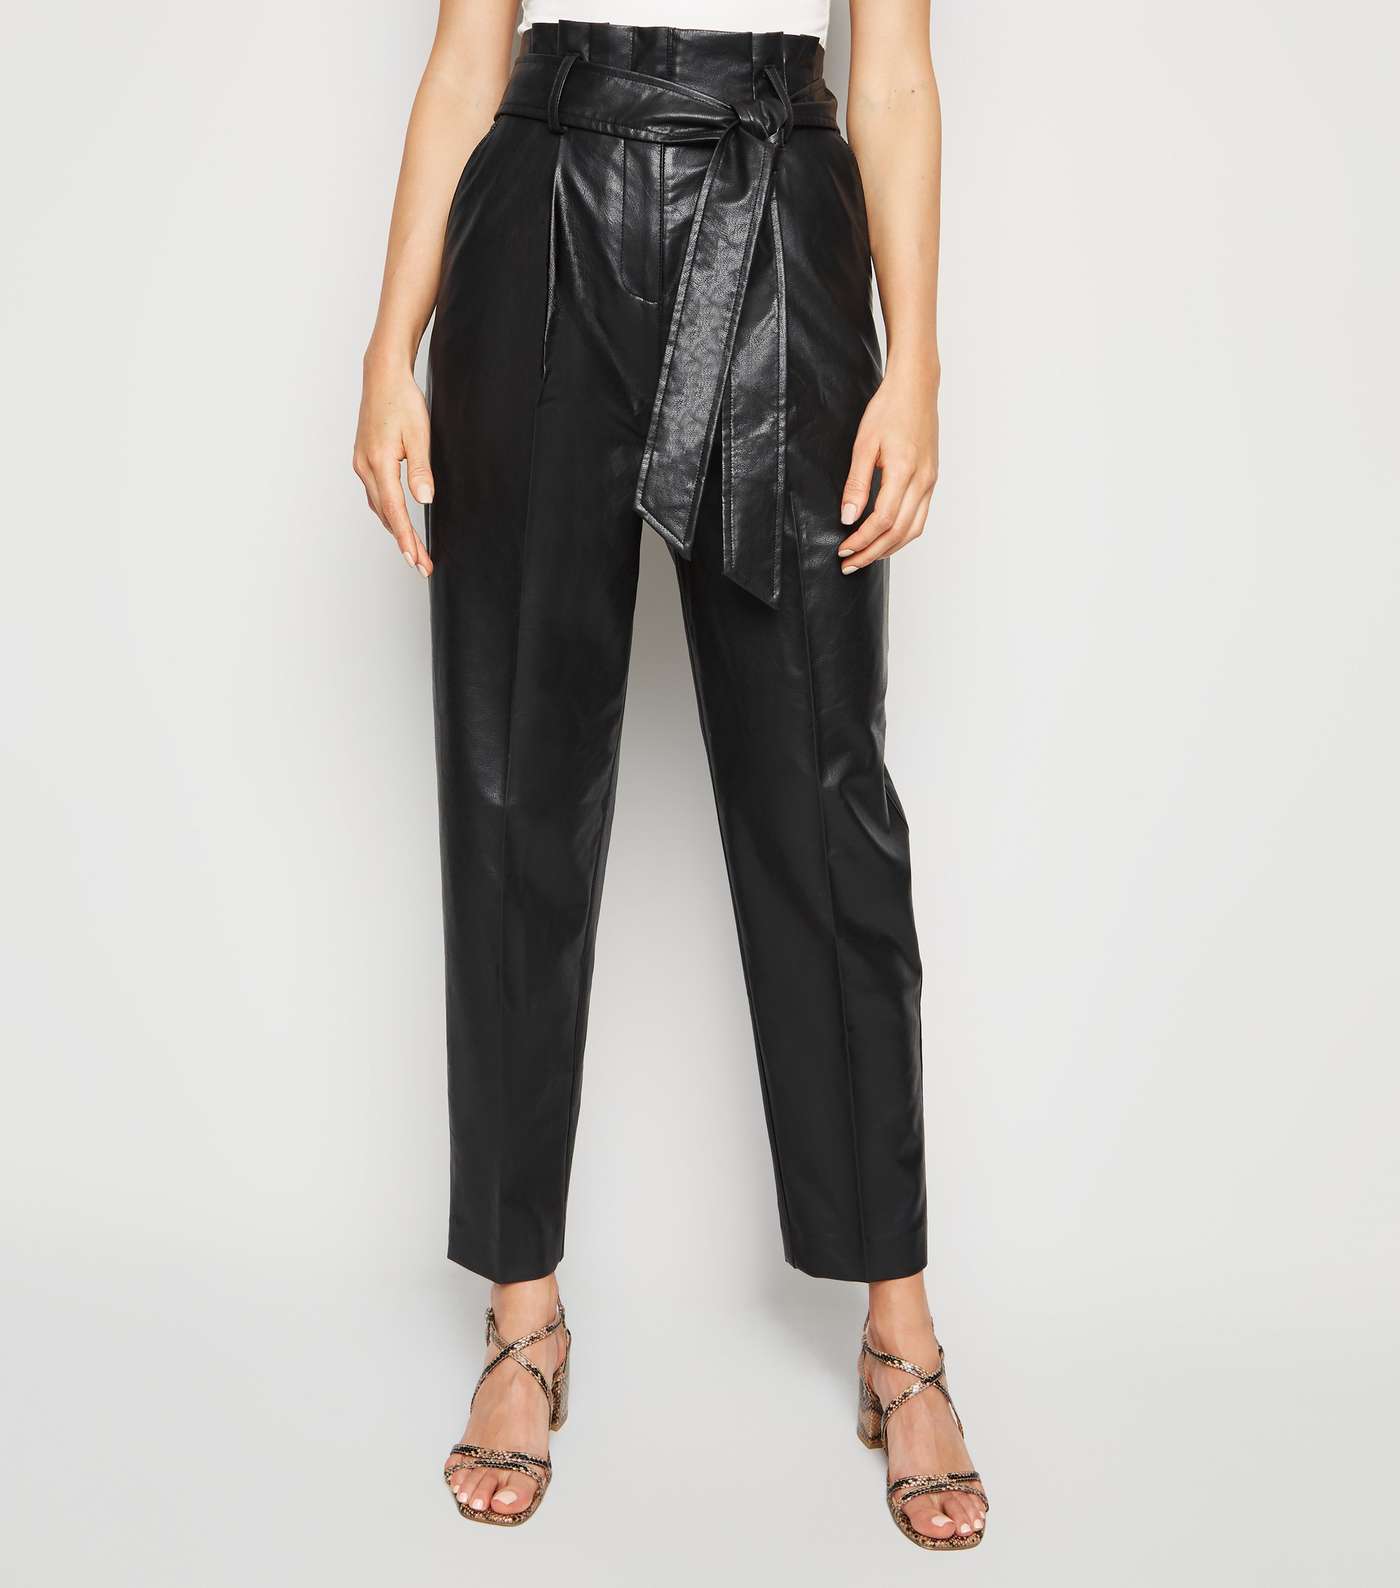 Black Leather-Look Tie High Waist Trousers Image 2